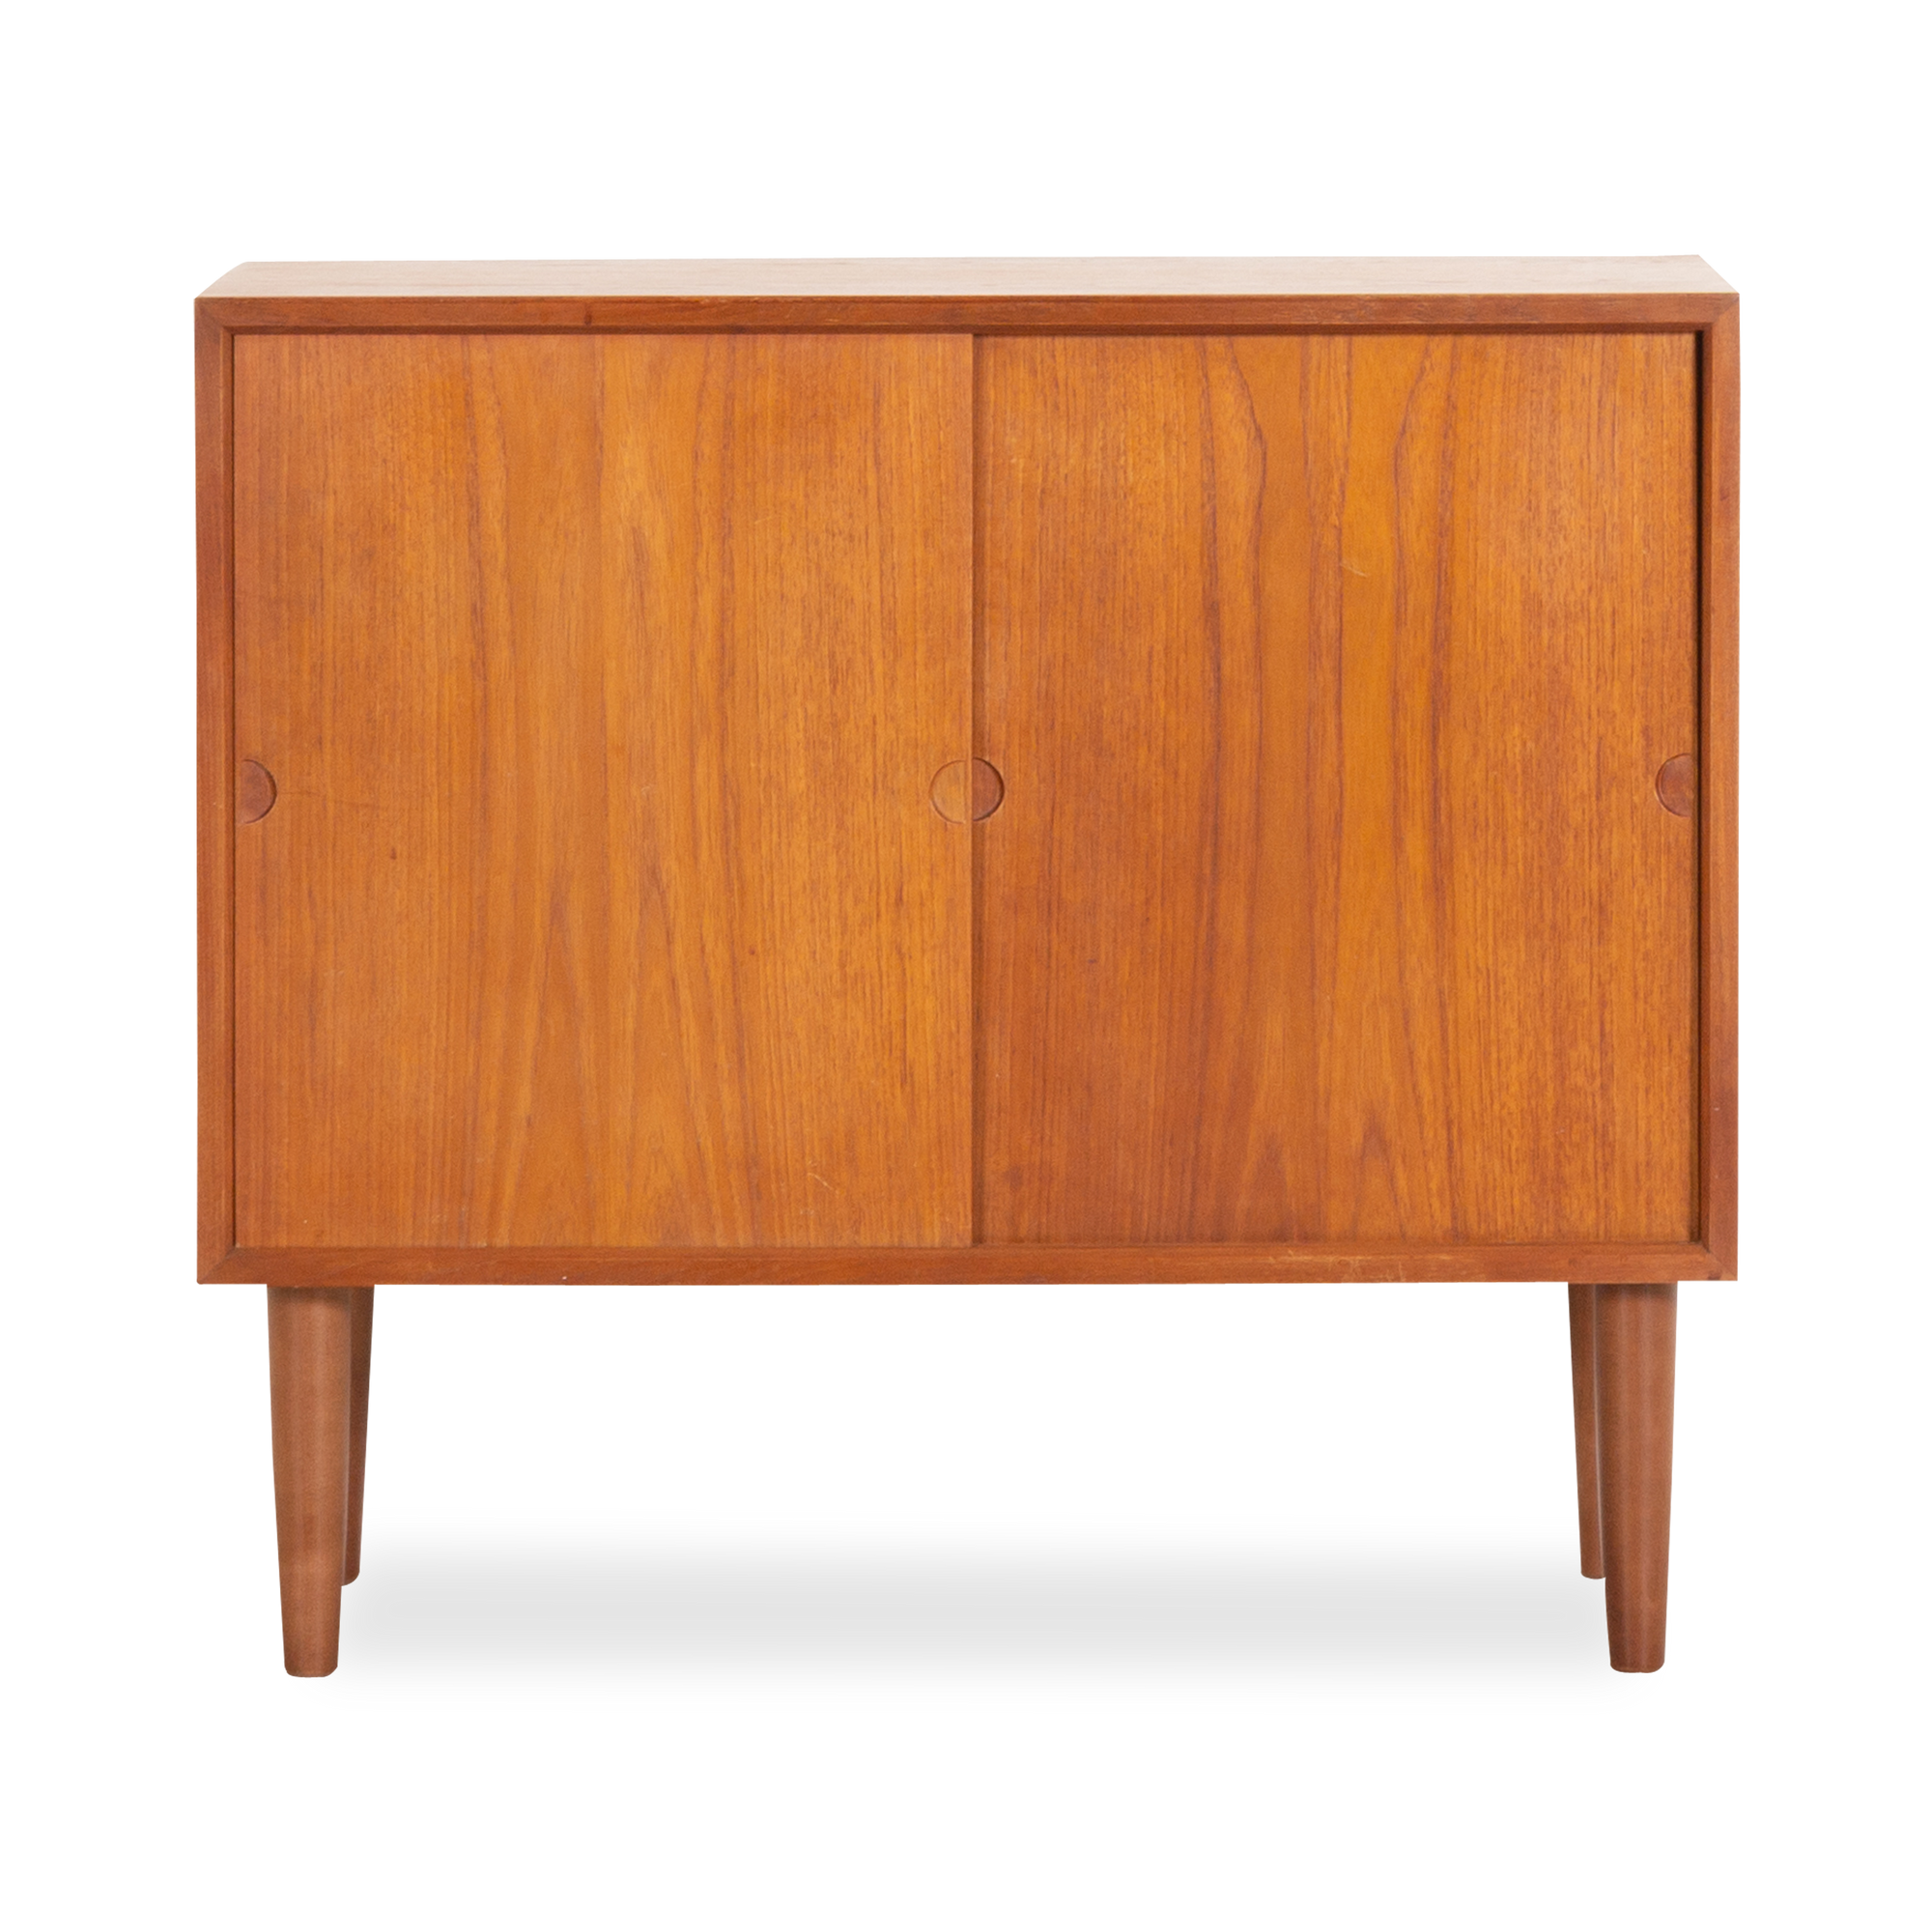 A stunning display of aged teak, this vintage cabinet was designed by Poul Cadovius and produced by CADO, Denmark.